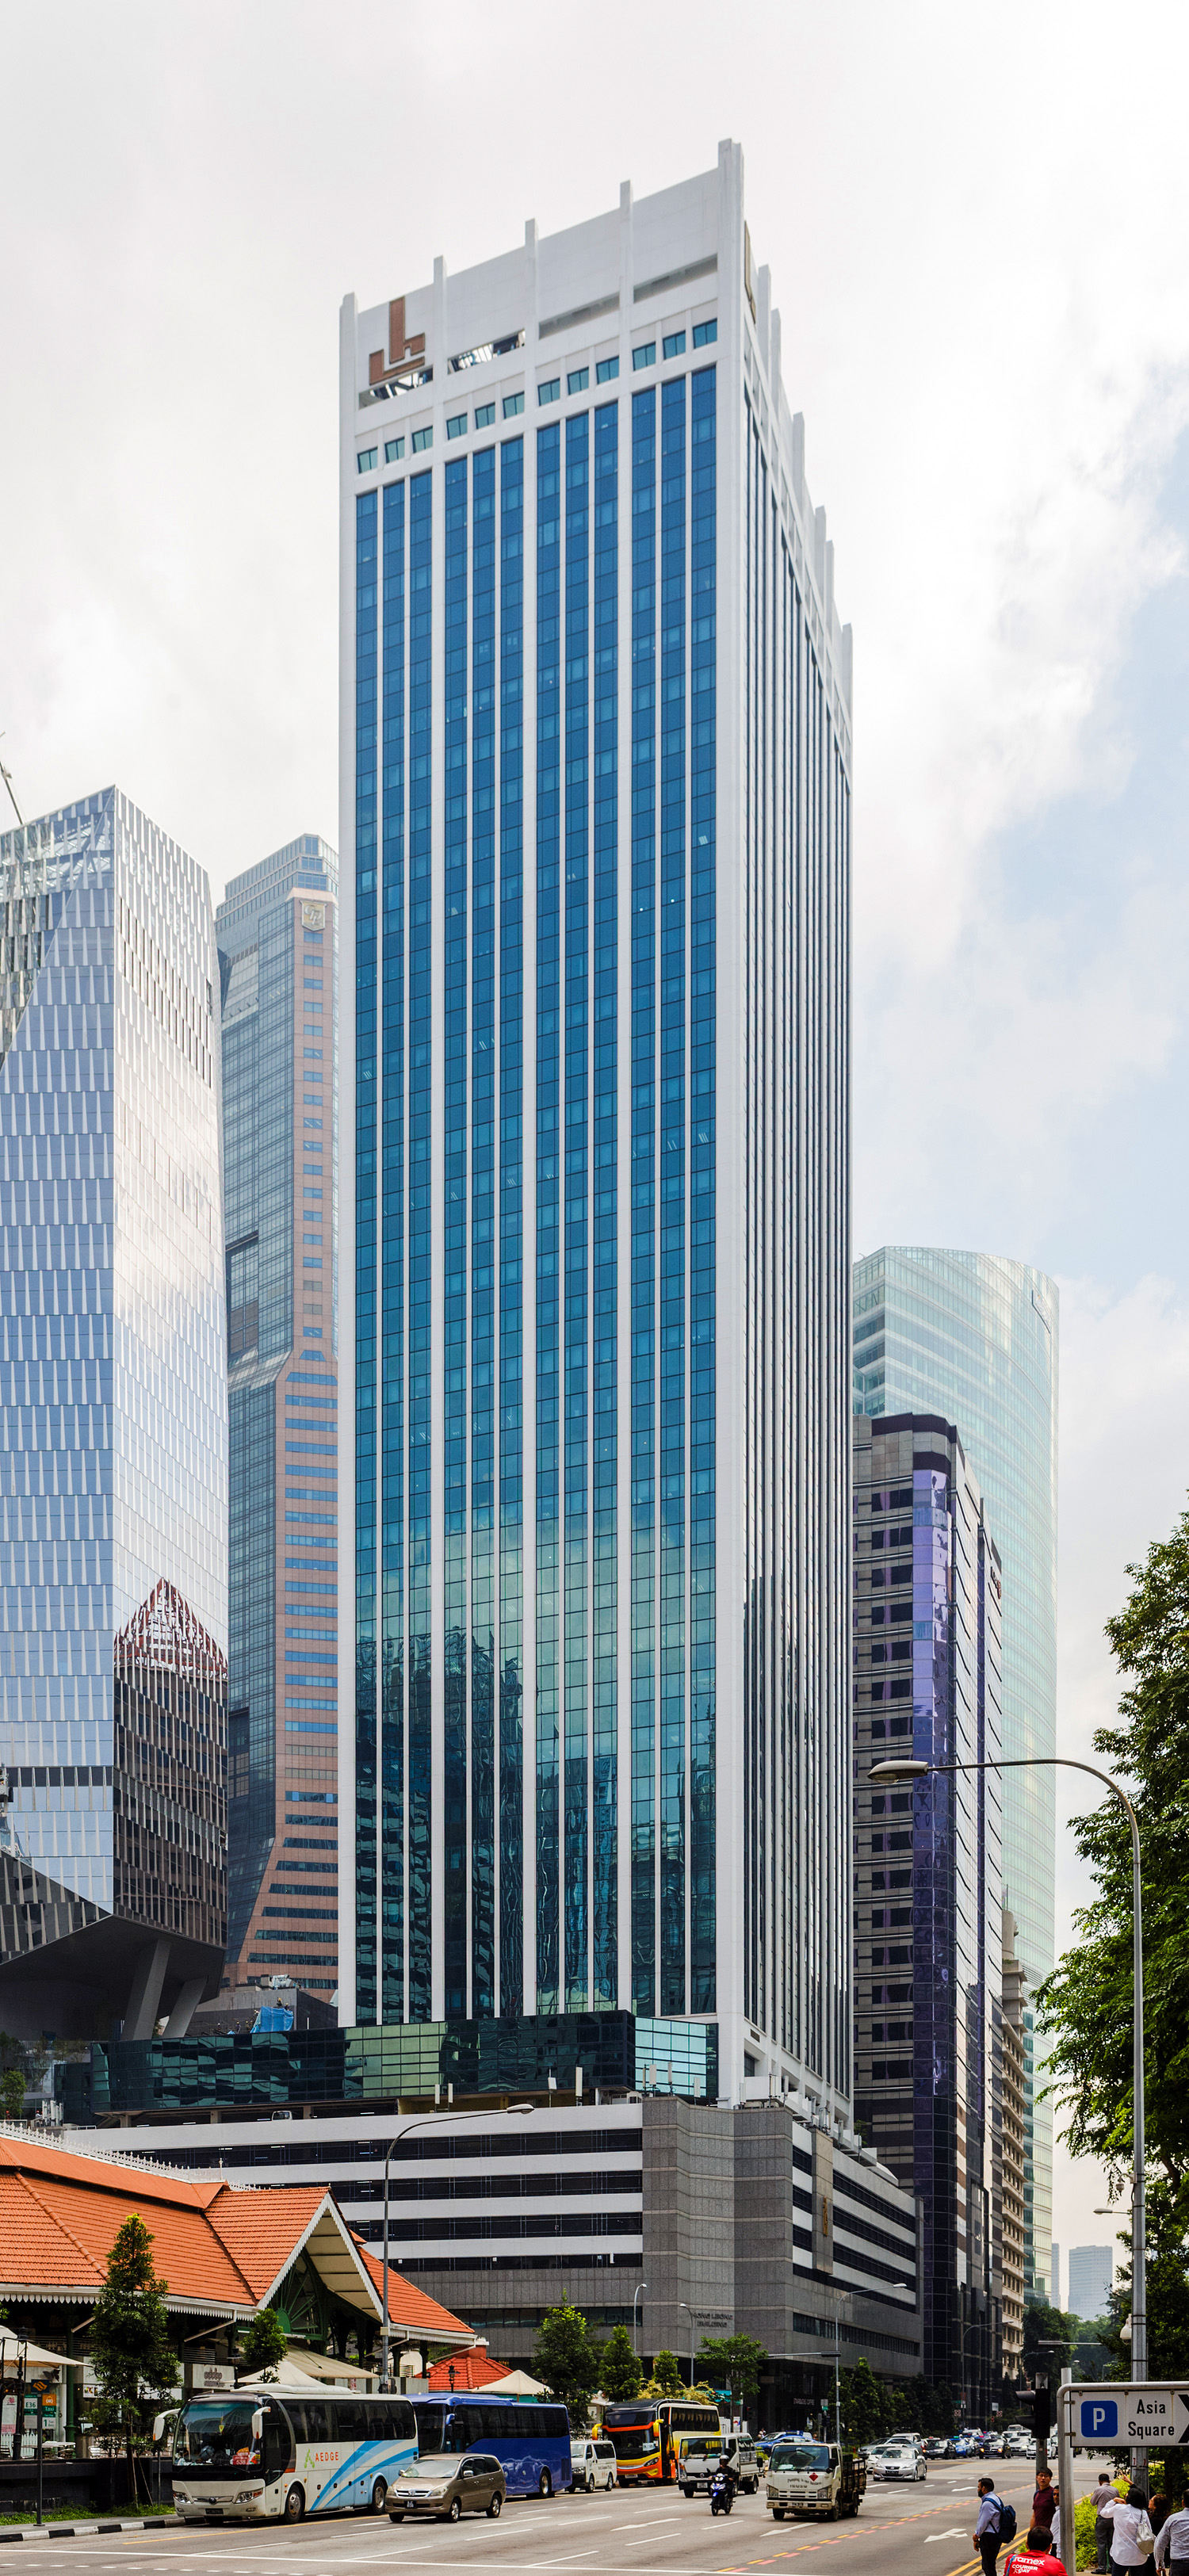 Hong Leong Finance Building, Singapore - View from the south. © Mathias Beinling